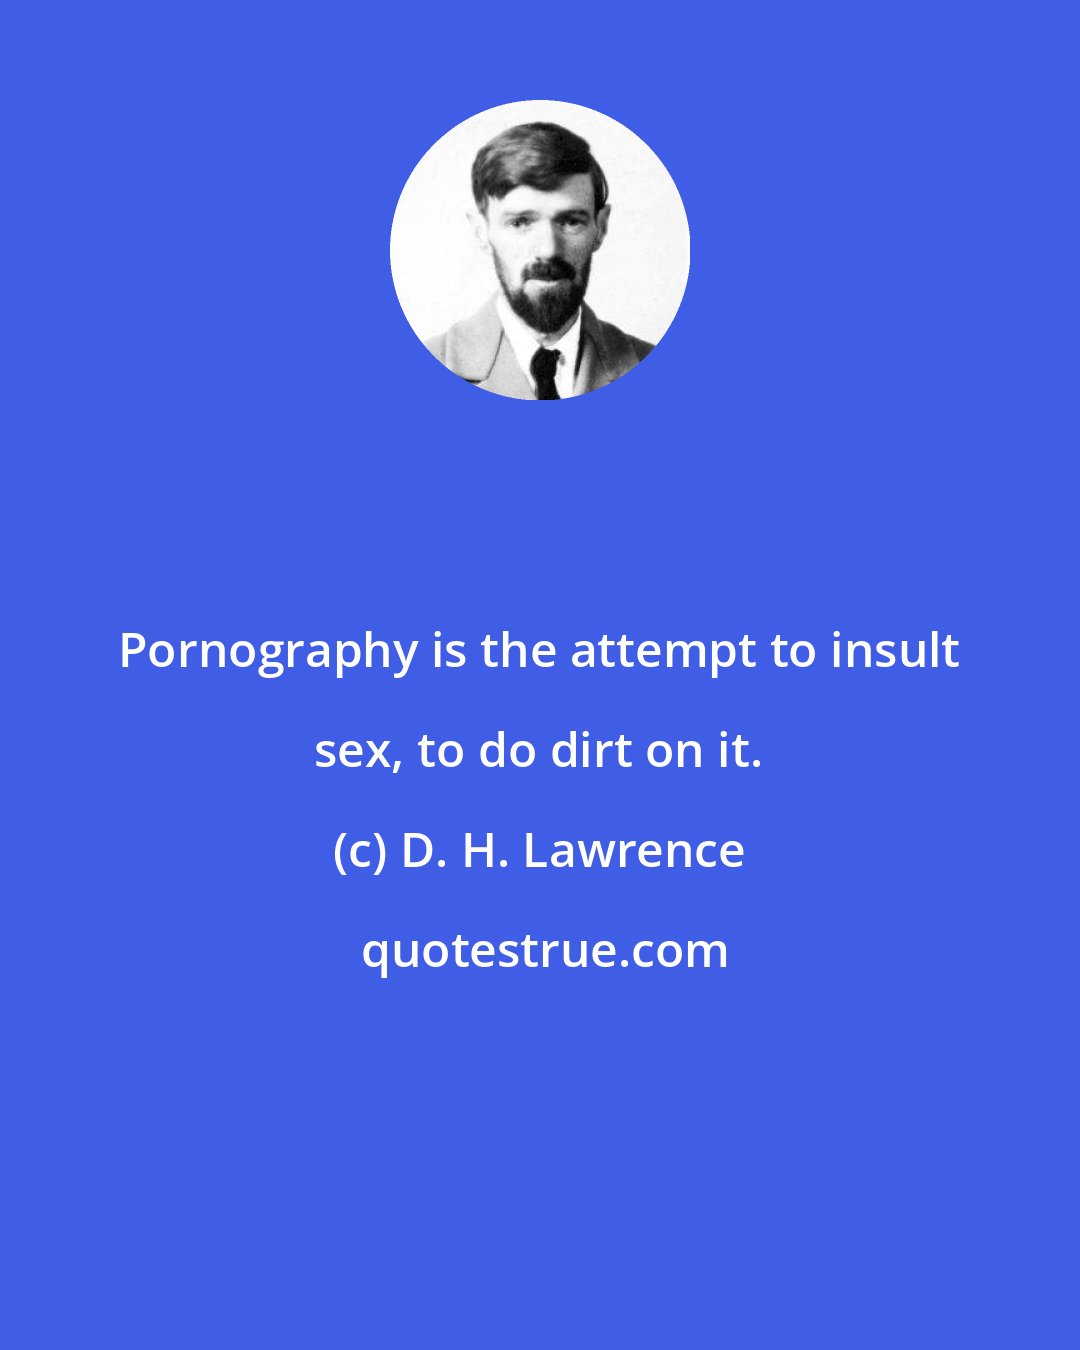 D. H. Lawrence: Pornography is the attempt to insult sex, to do dirt on it.